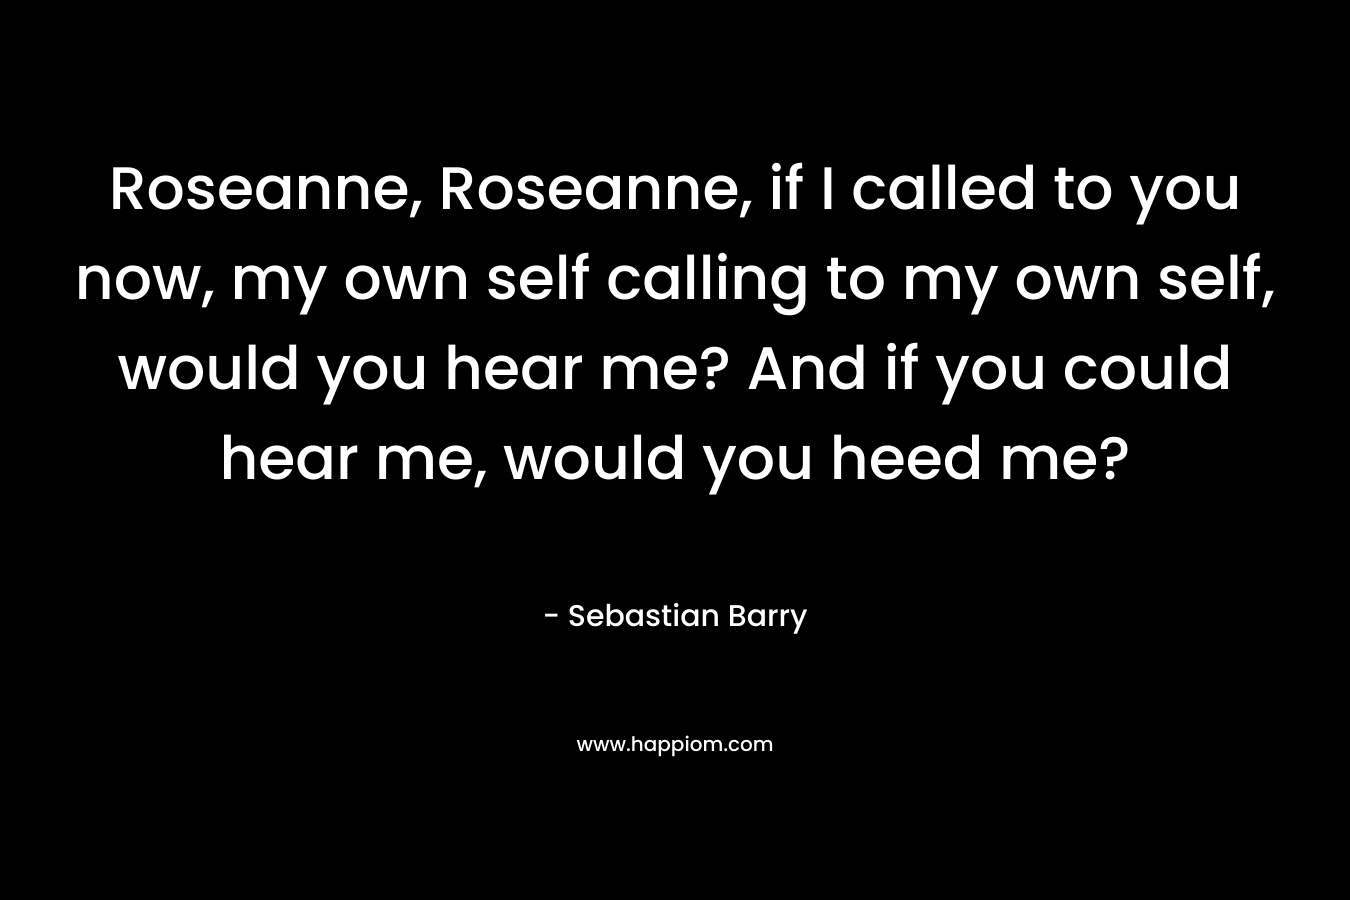 Roseanne, Roseanne, if I called to you now, my own self calling to my own self, would you hear me? And if you could hear me, would you heed me?